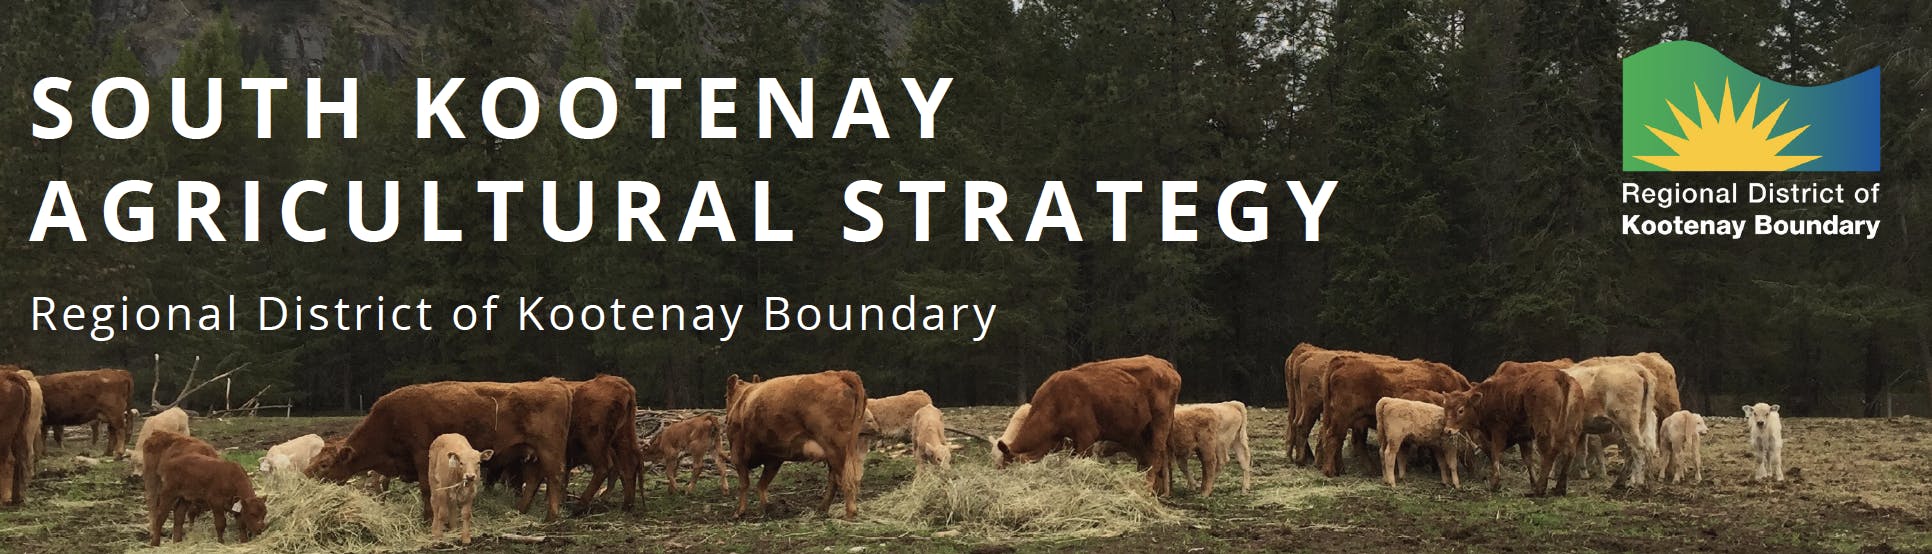 South Kootenay Agricultural Strategy